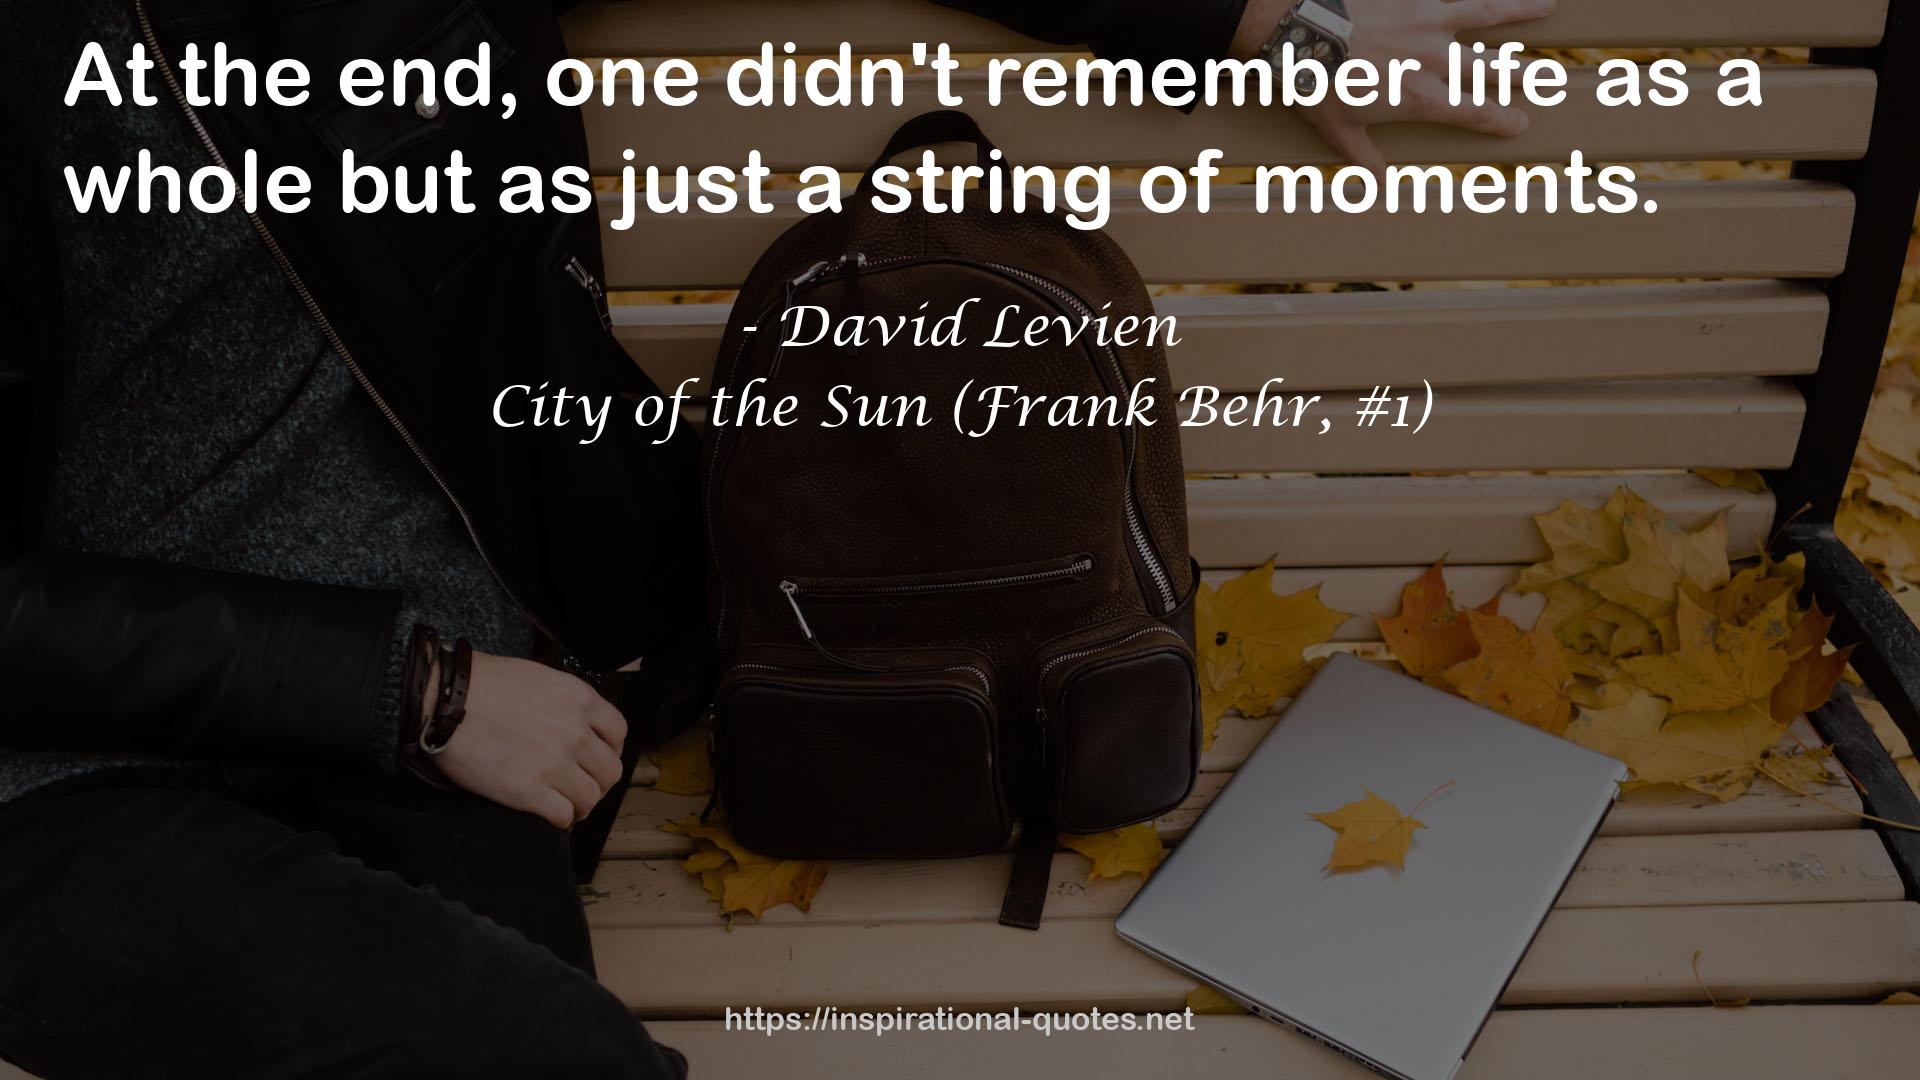 City of the Sun (Frank Behr, #1) QUOTES